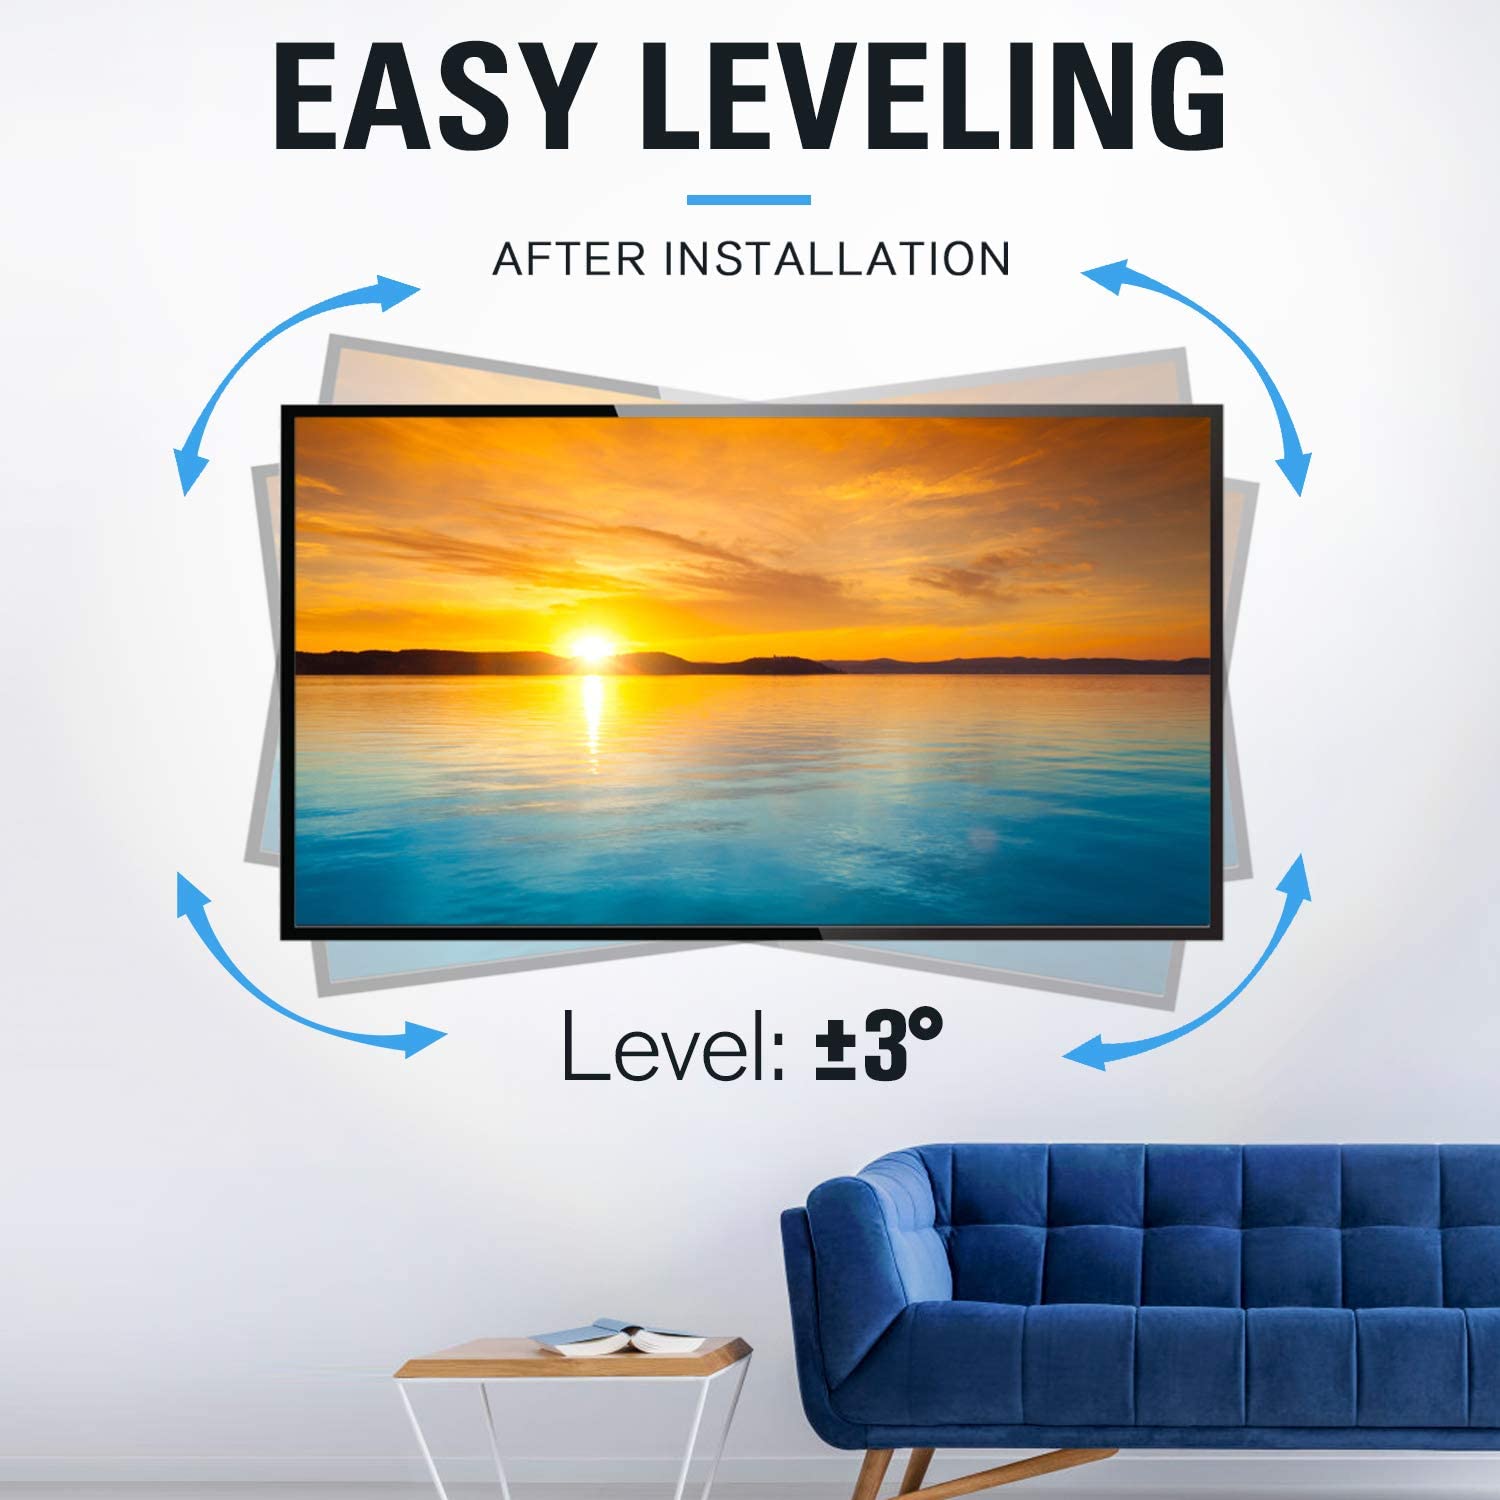 easily level the TV after installation